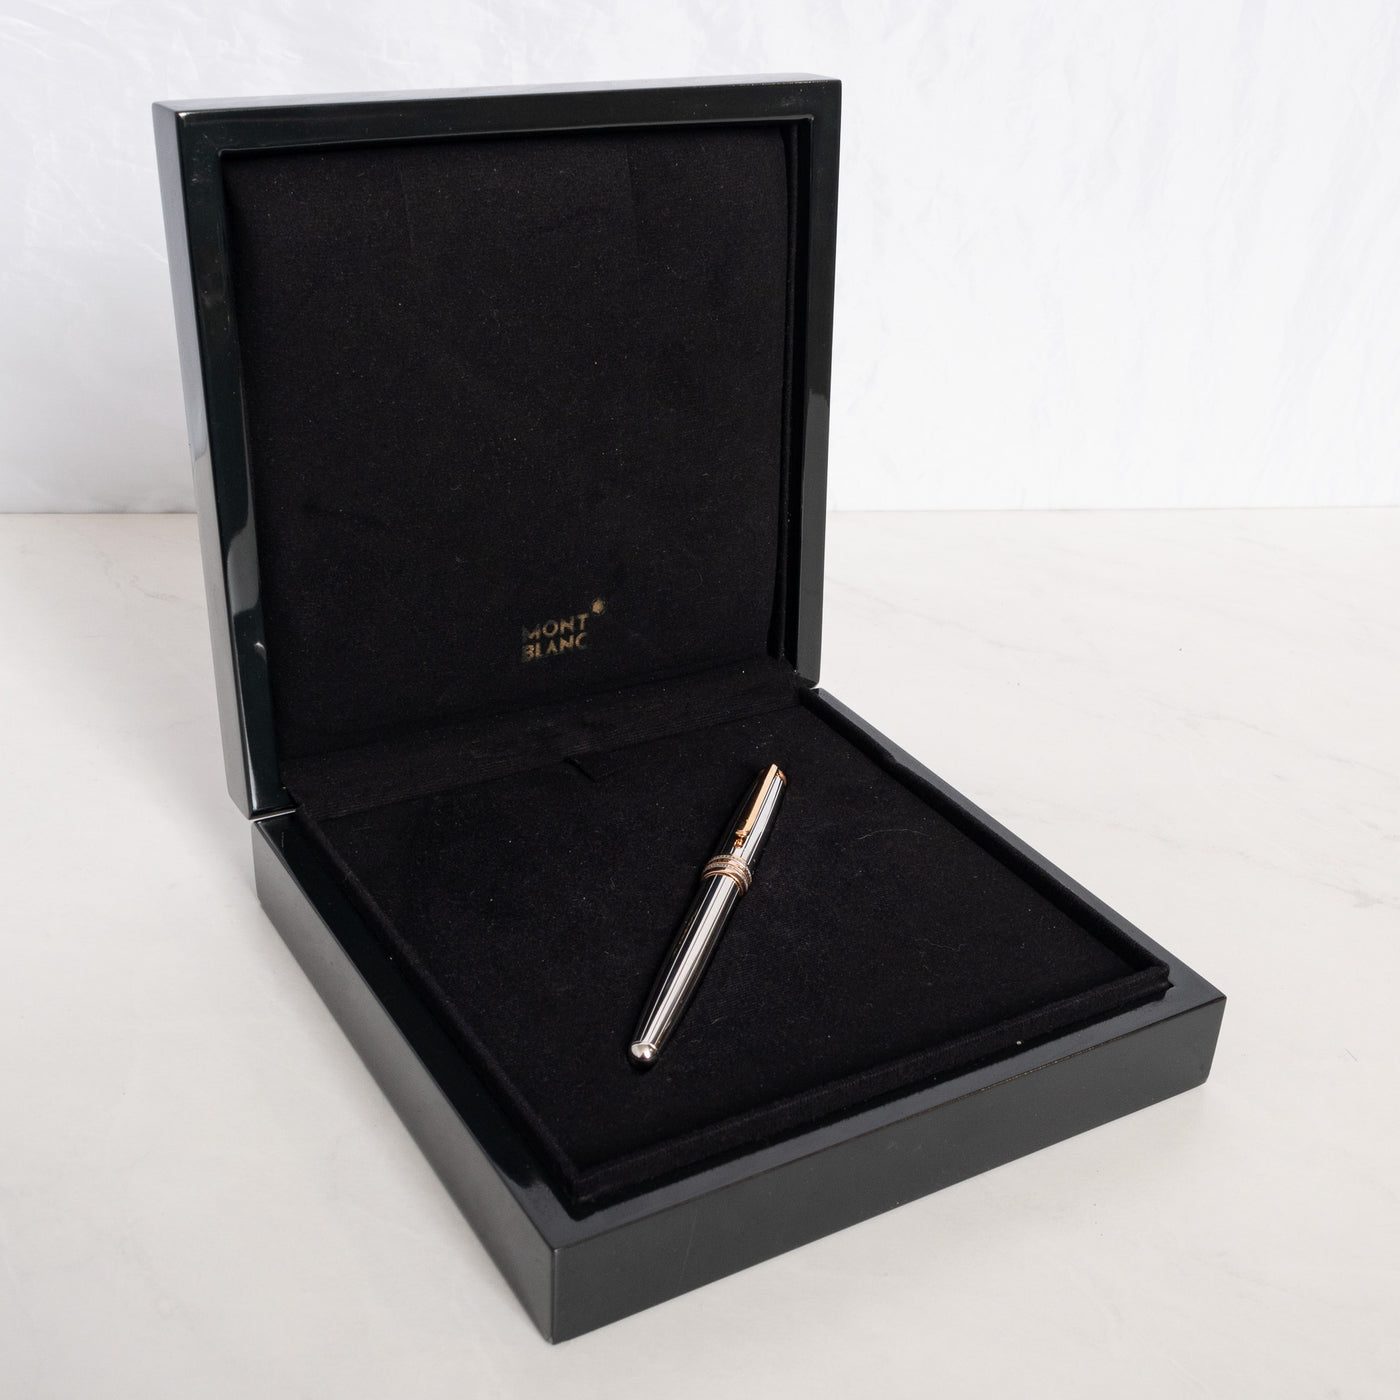 Montblanc Meisterstuck 144 75th Anniversary LE 75 Solid 18k Gold & Diamond Fountain Pen rare